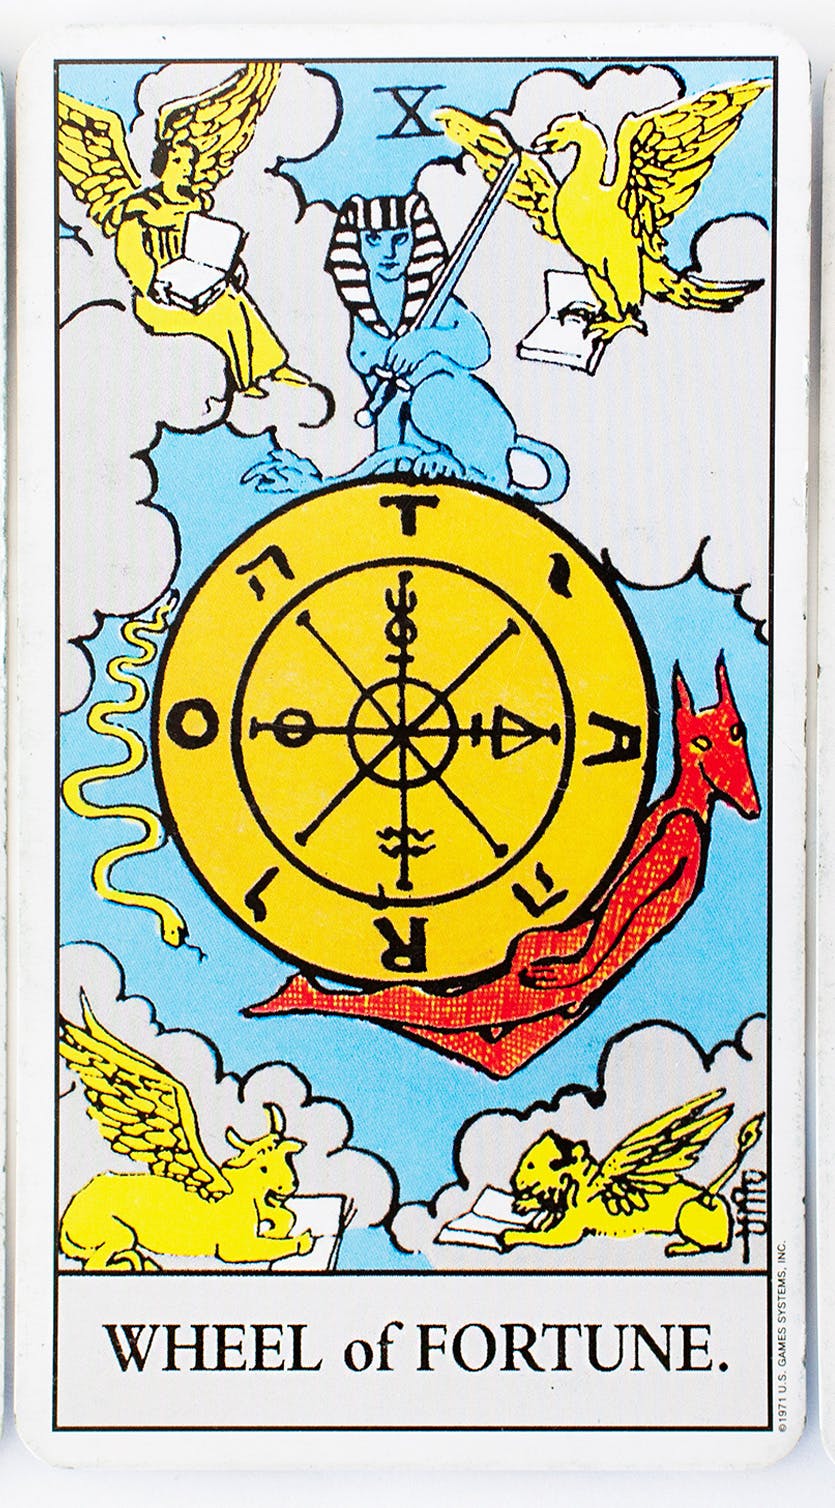 The wheel of fortune card from the Rider-waite deck. Illustration of a gold wheel with the devil holding it up from the bottom and angelic figures above.